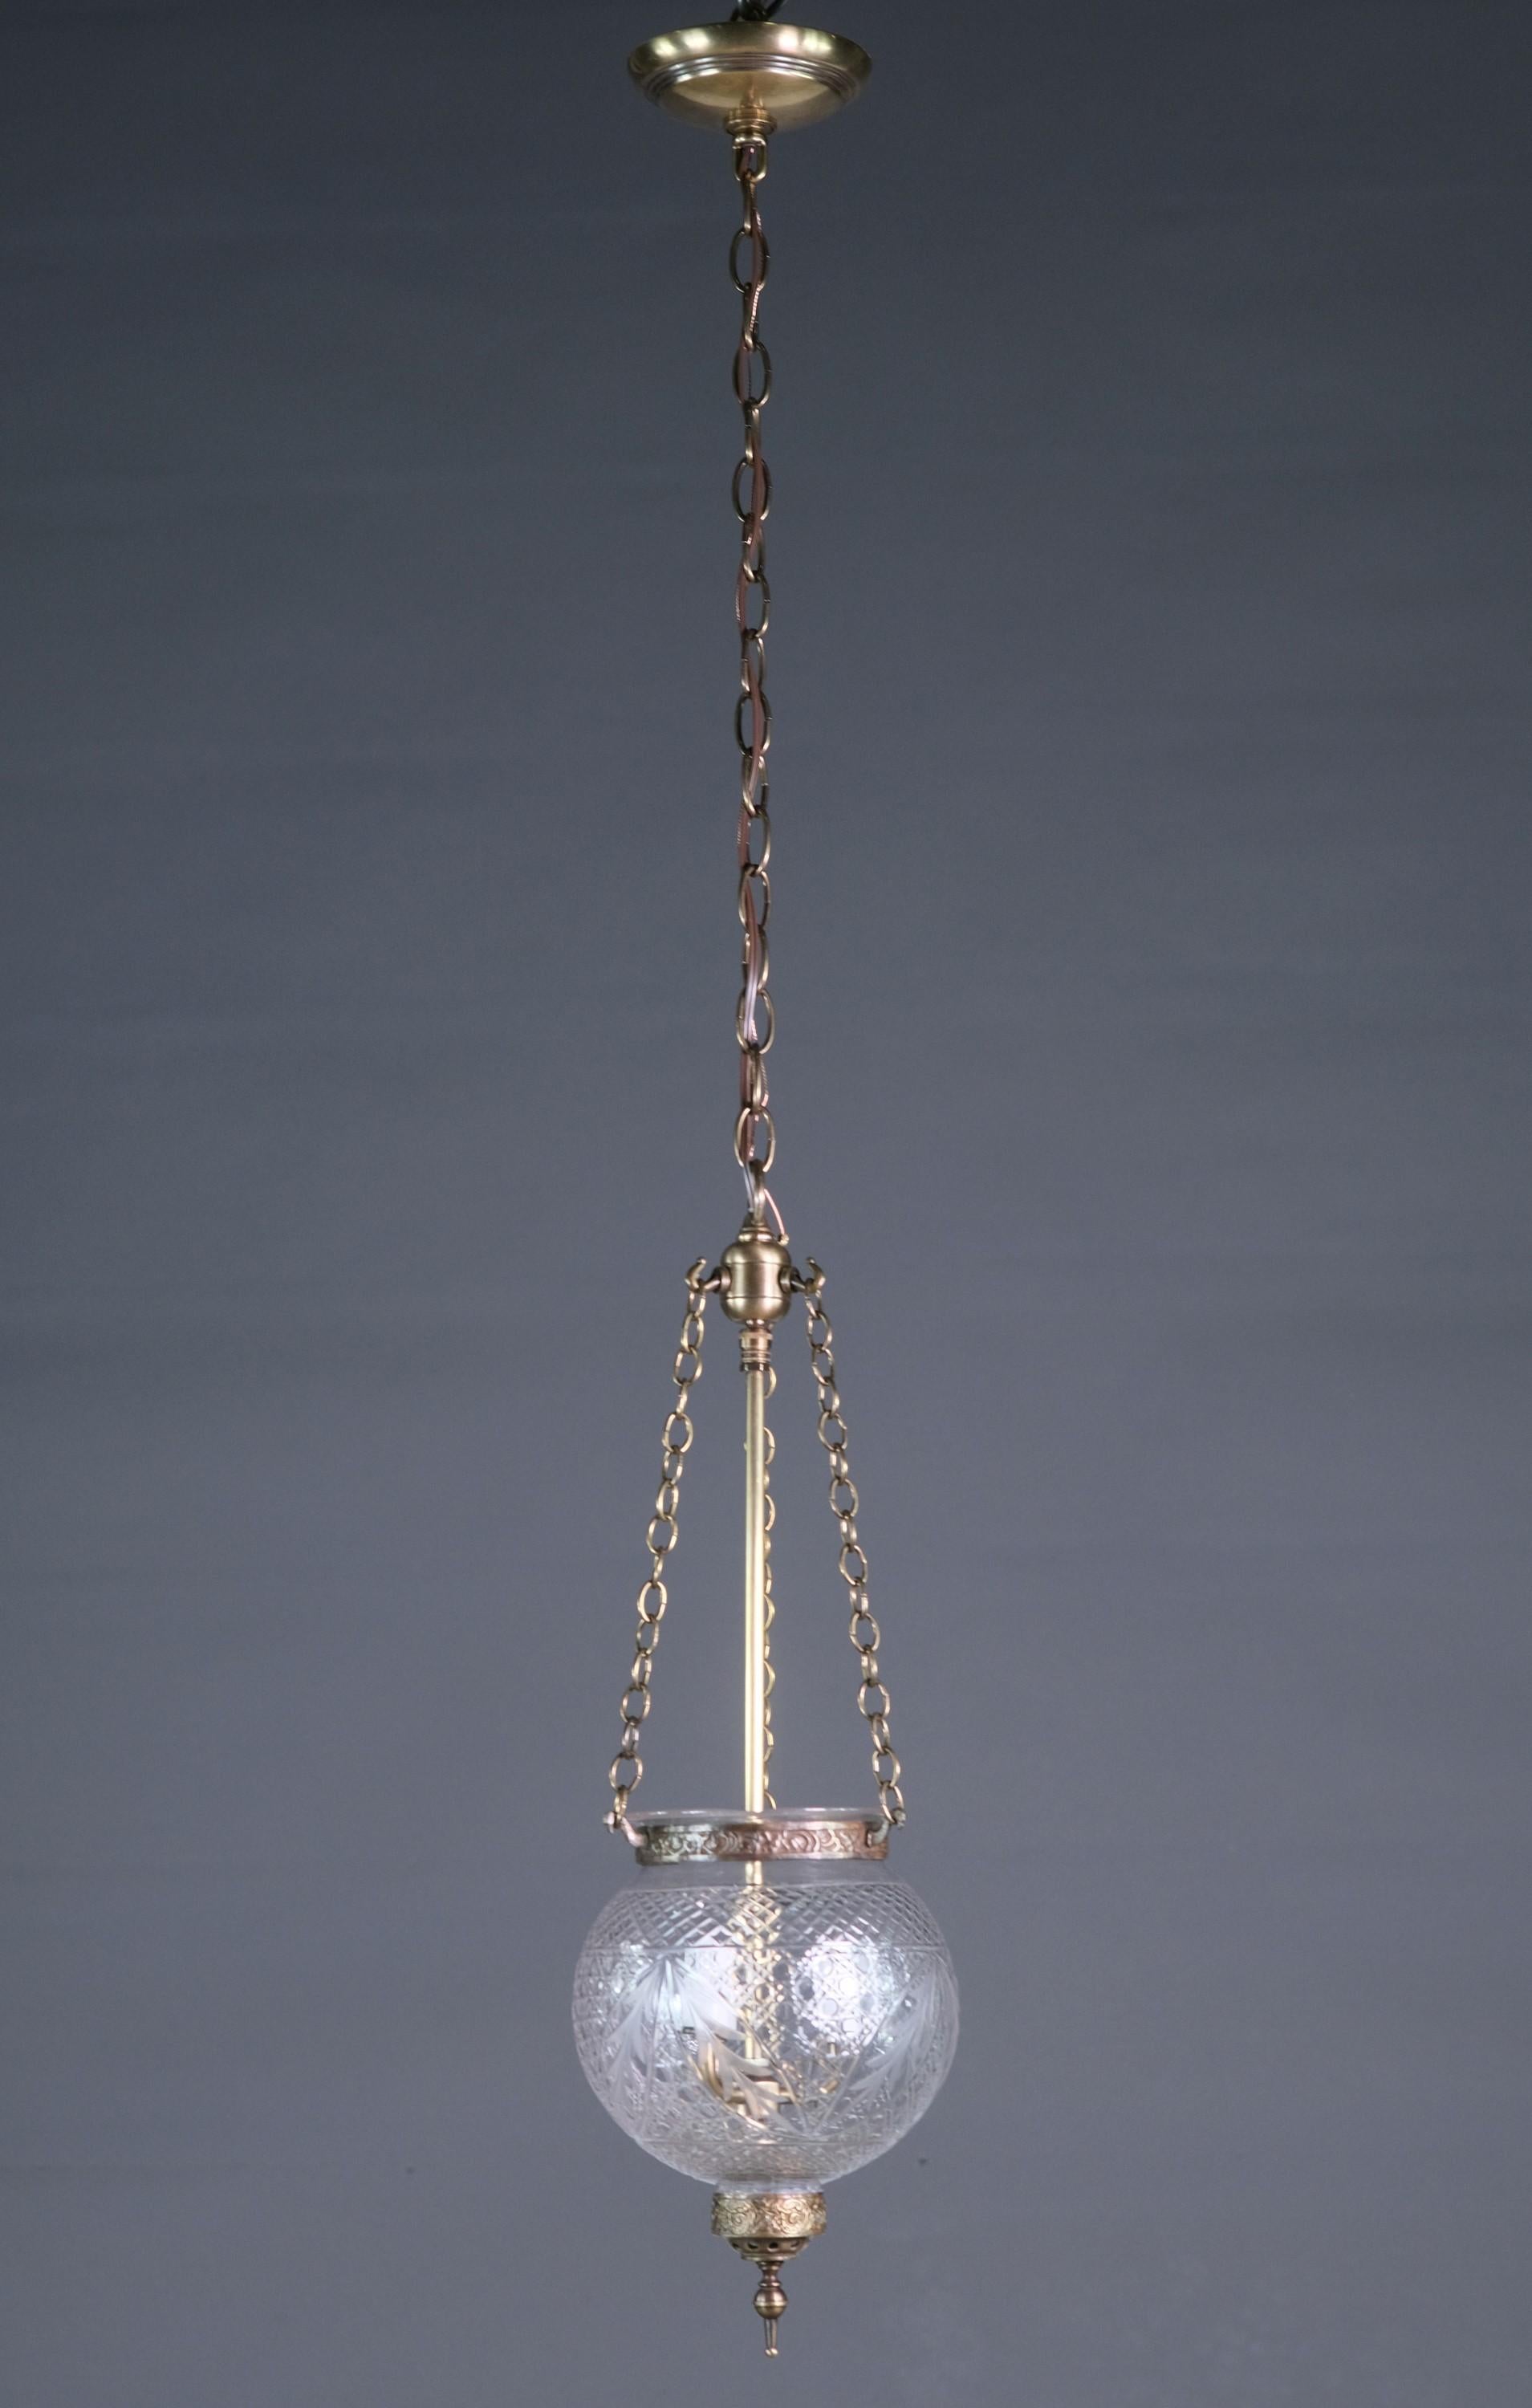 20th Century clear glass bell jar light. Features a basket weave pattern with leaves. Brass hardware with three E12 candelabra base light sockets. Cleaned and restored. This can be seen at our 400 Gilligan St location in Scranton, PA.